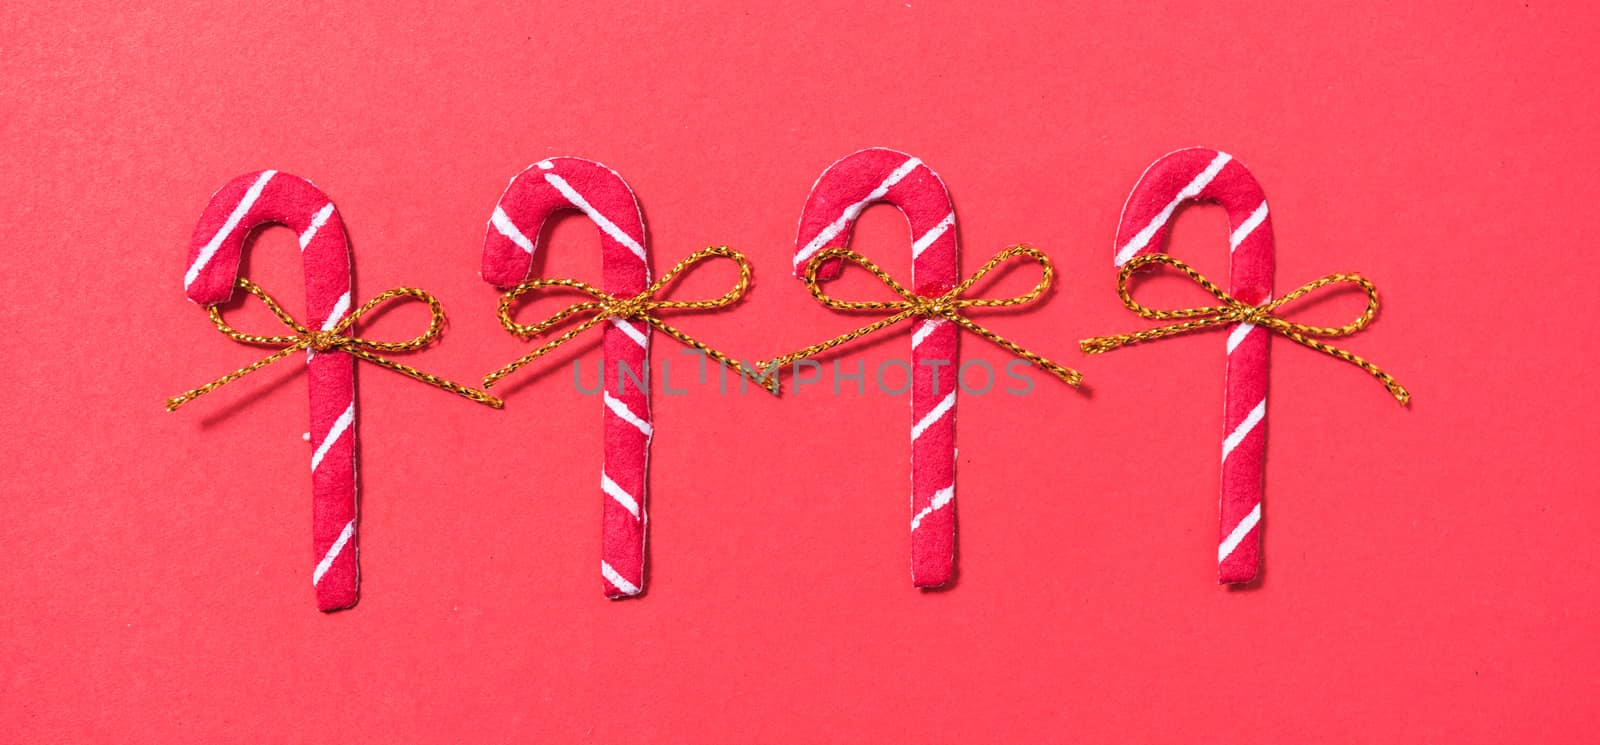 Christmas 4 candies candy cane on red background by Sorapop